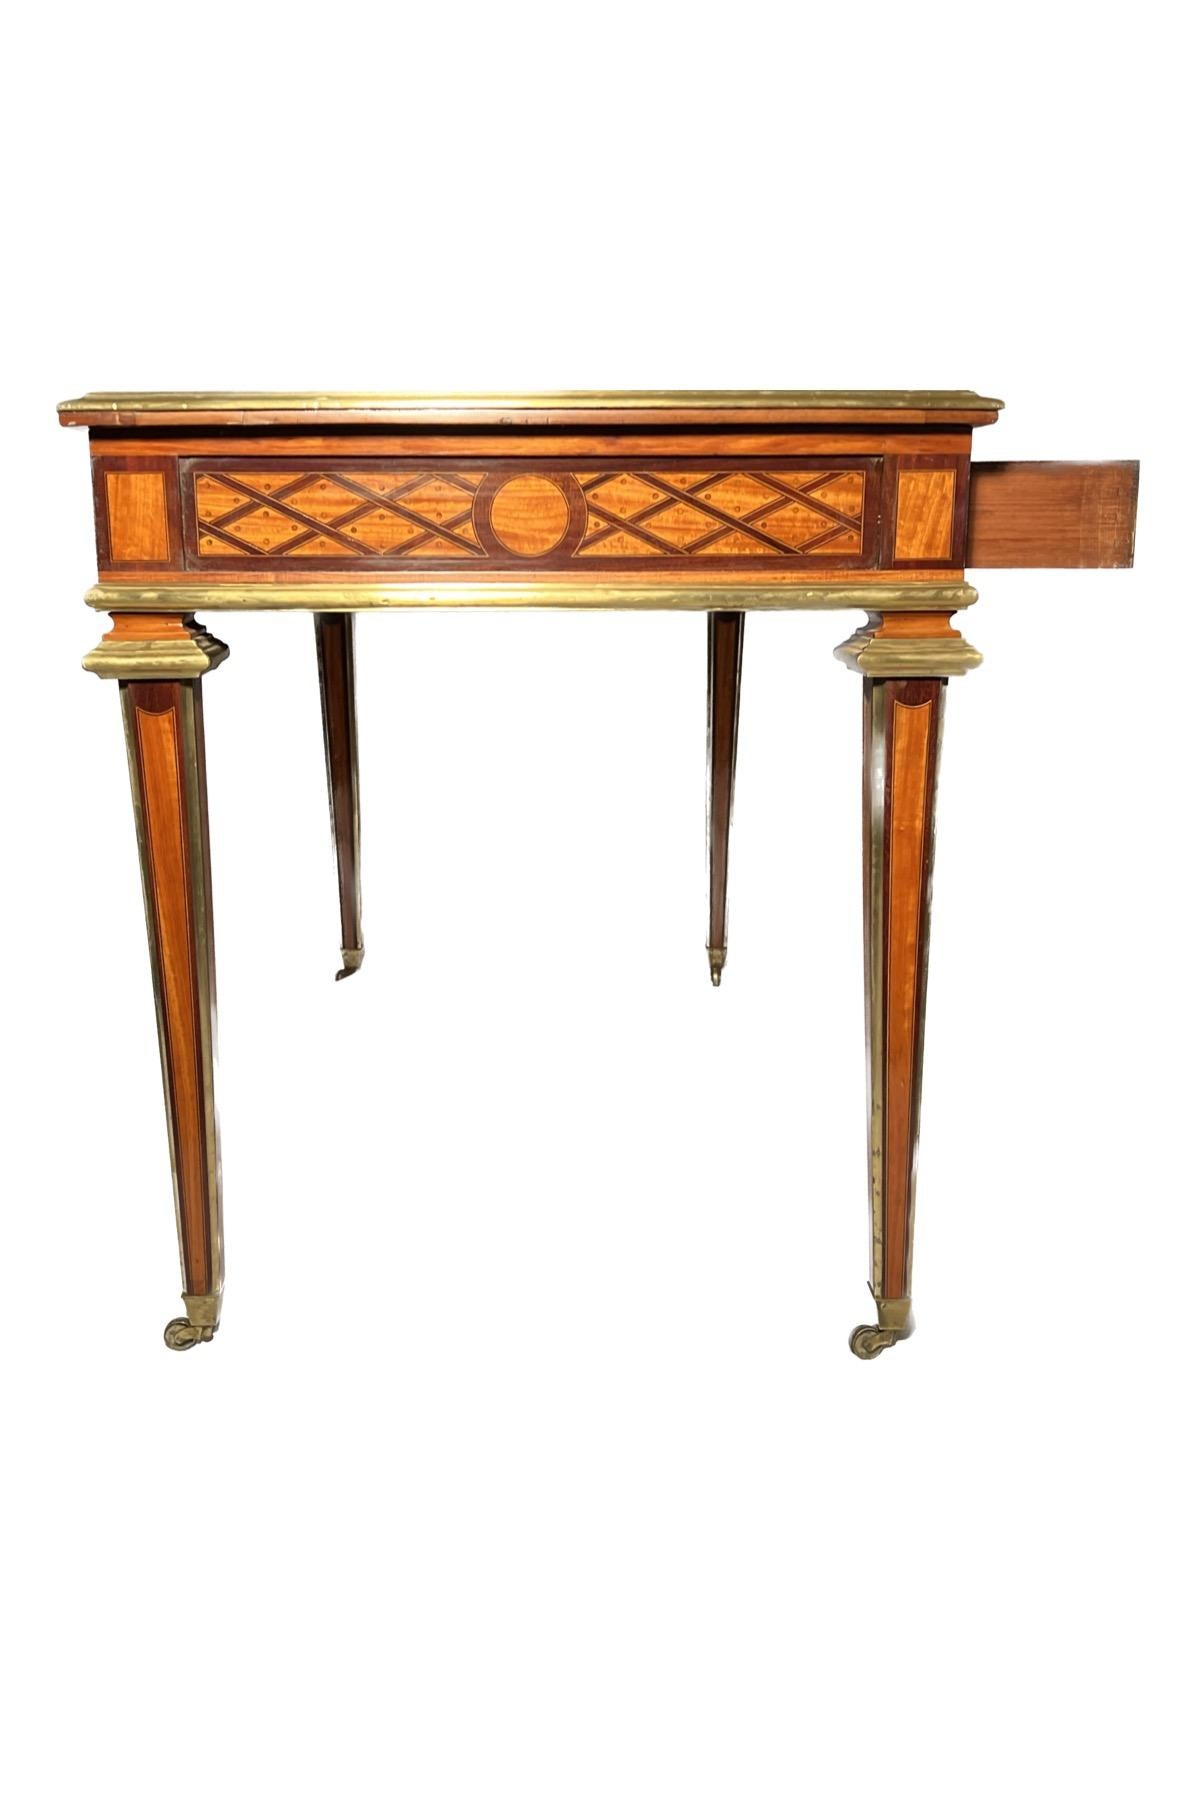 Antique English Satinwood Parquetry Writing Desk circa 1890 In Good Condition For Sale In New Orleans, LA